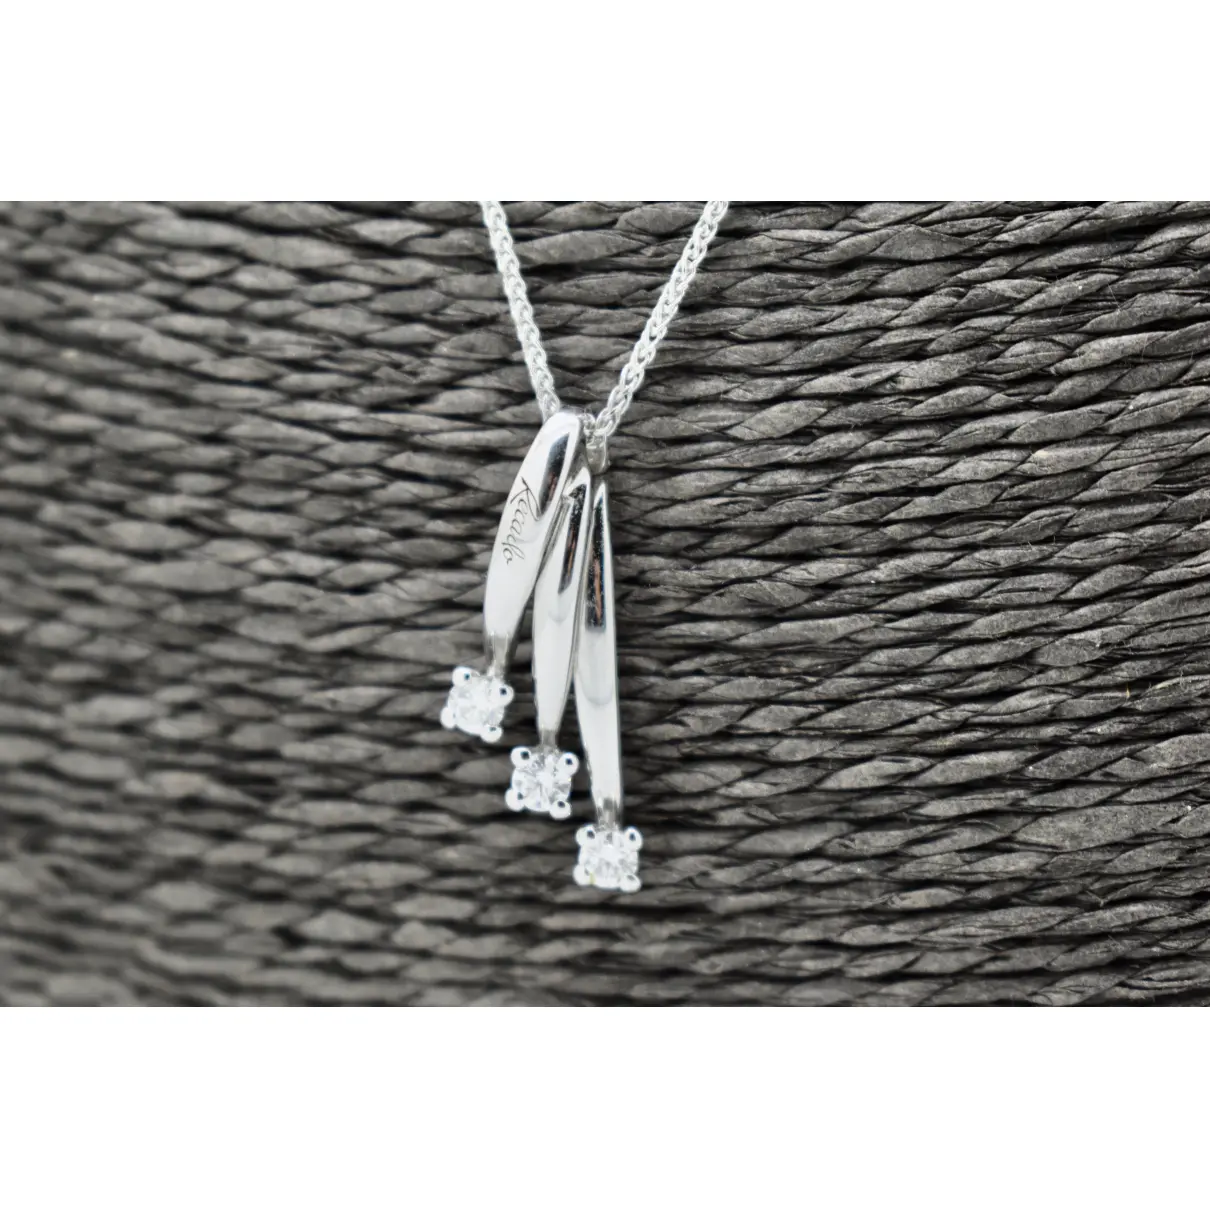 Buy Recarlo White gold necklace online